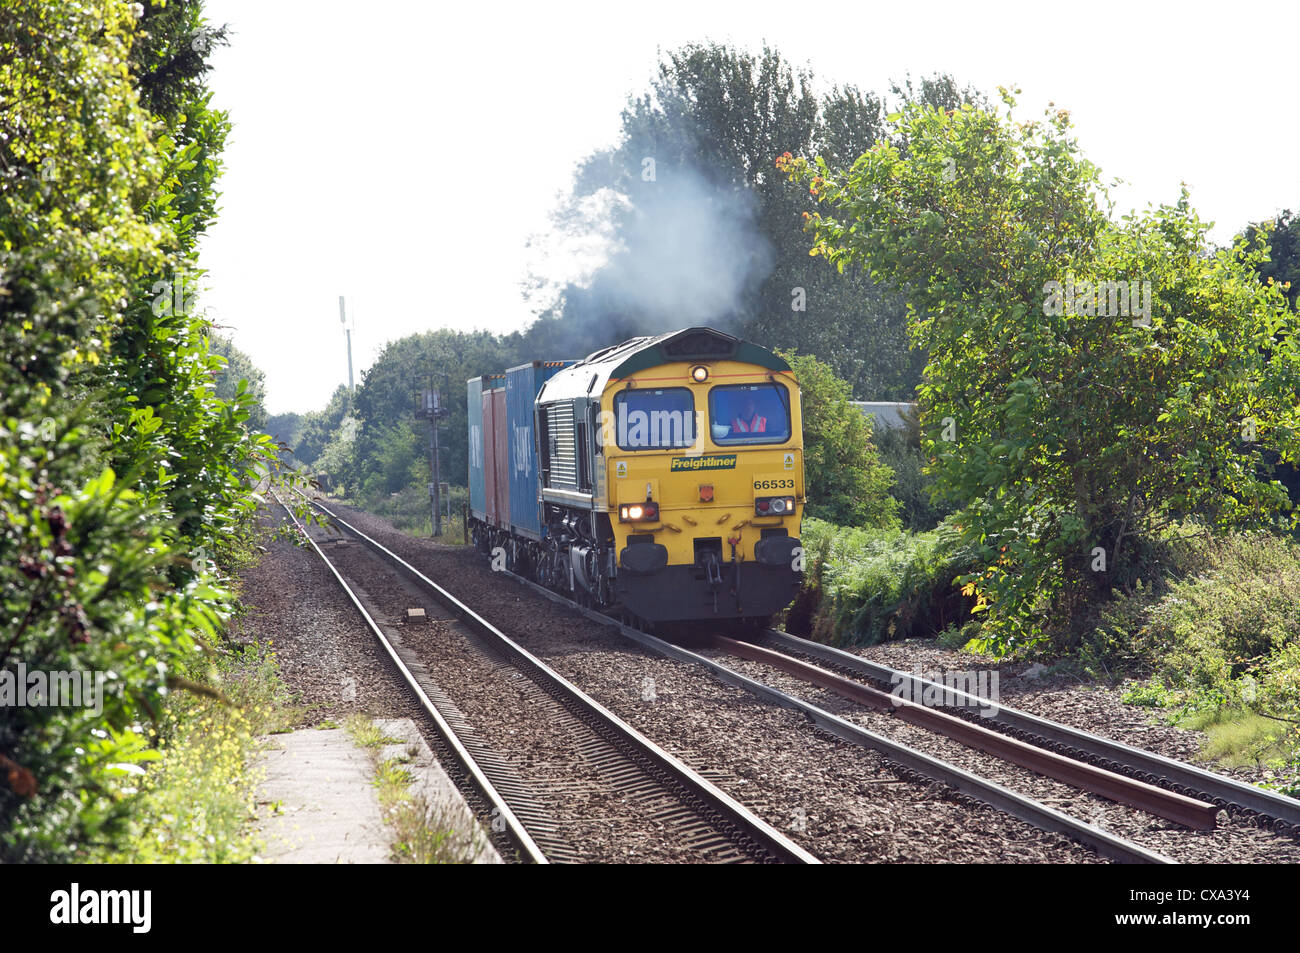 Freight train from the port of Felixstowe about to join the single track branch line to Ipswich at Trimley, Suffolk, UK. Stock Photo